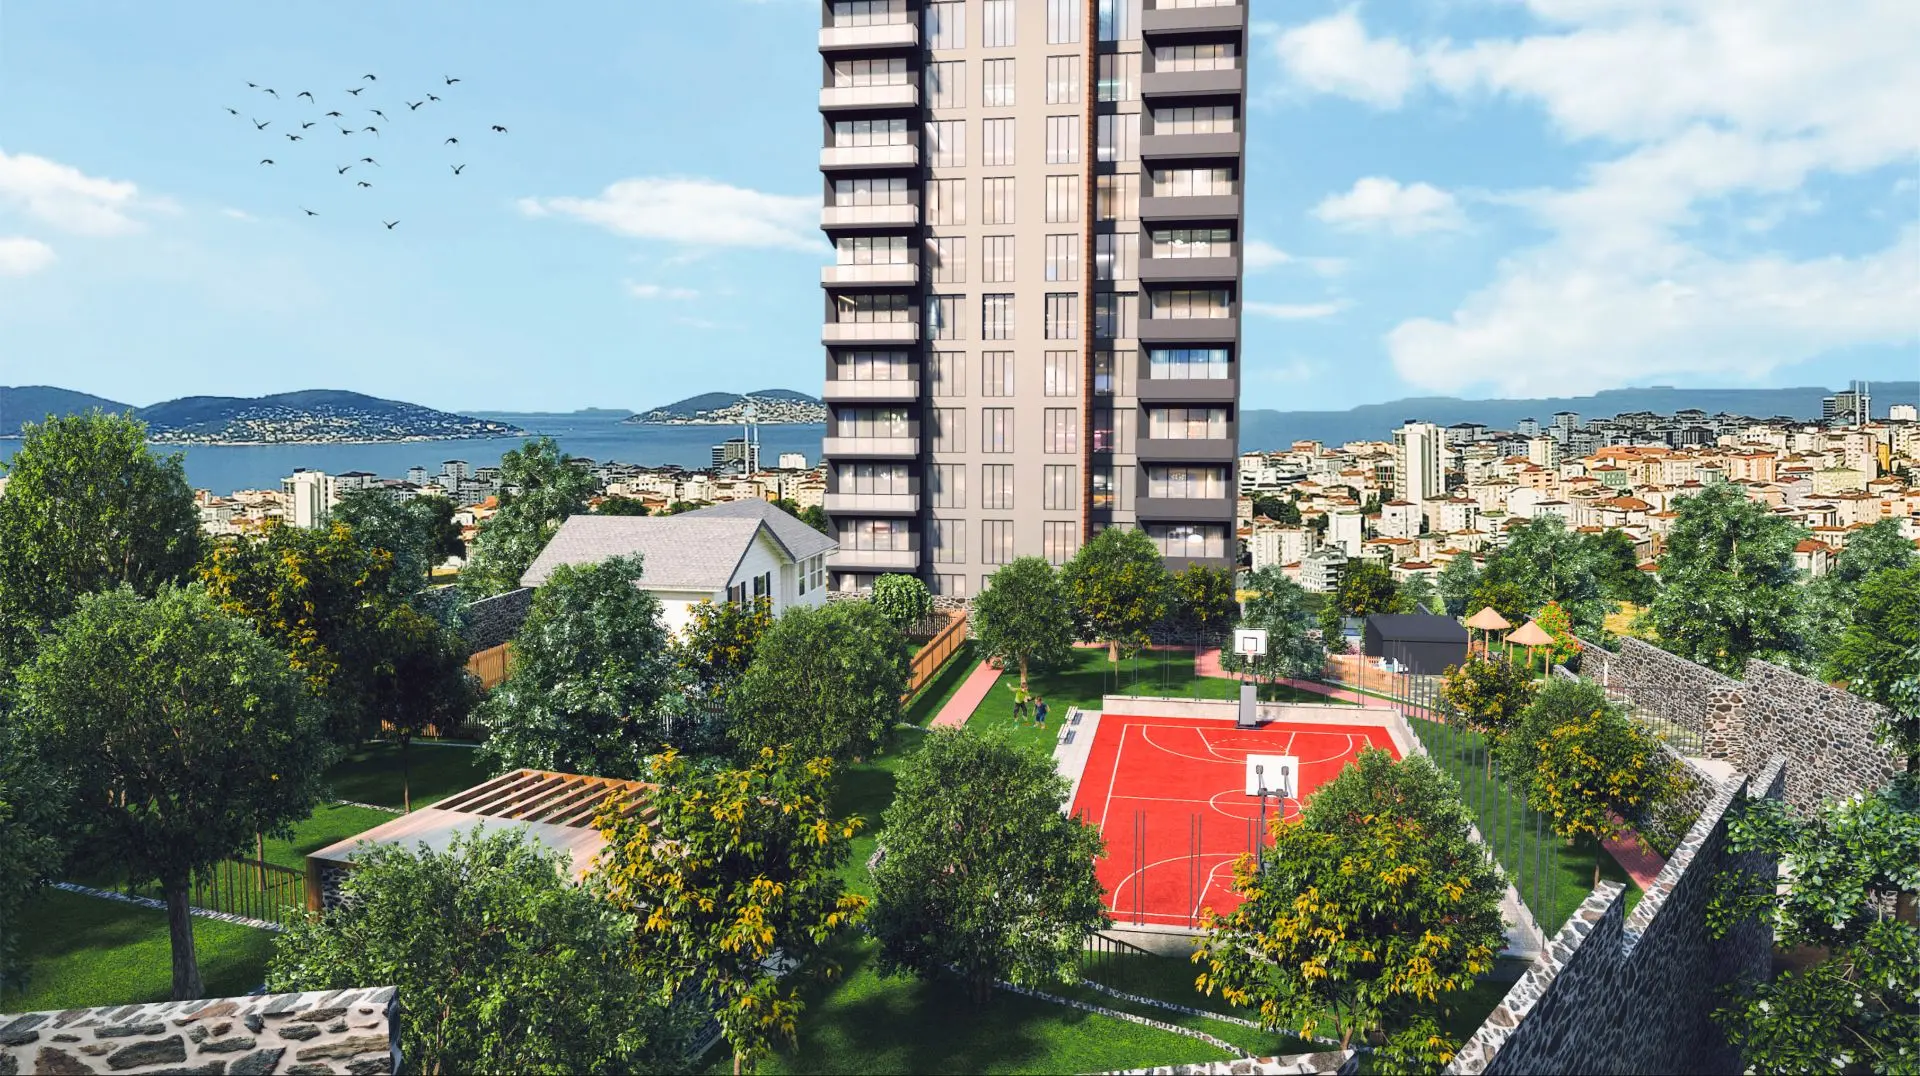 NEW FULL ACTIVITY COMPLEX PROJECT IN ISTANBUL